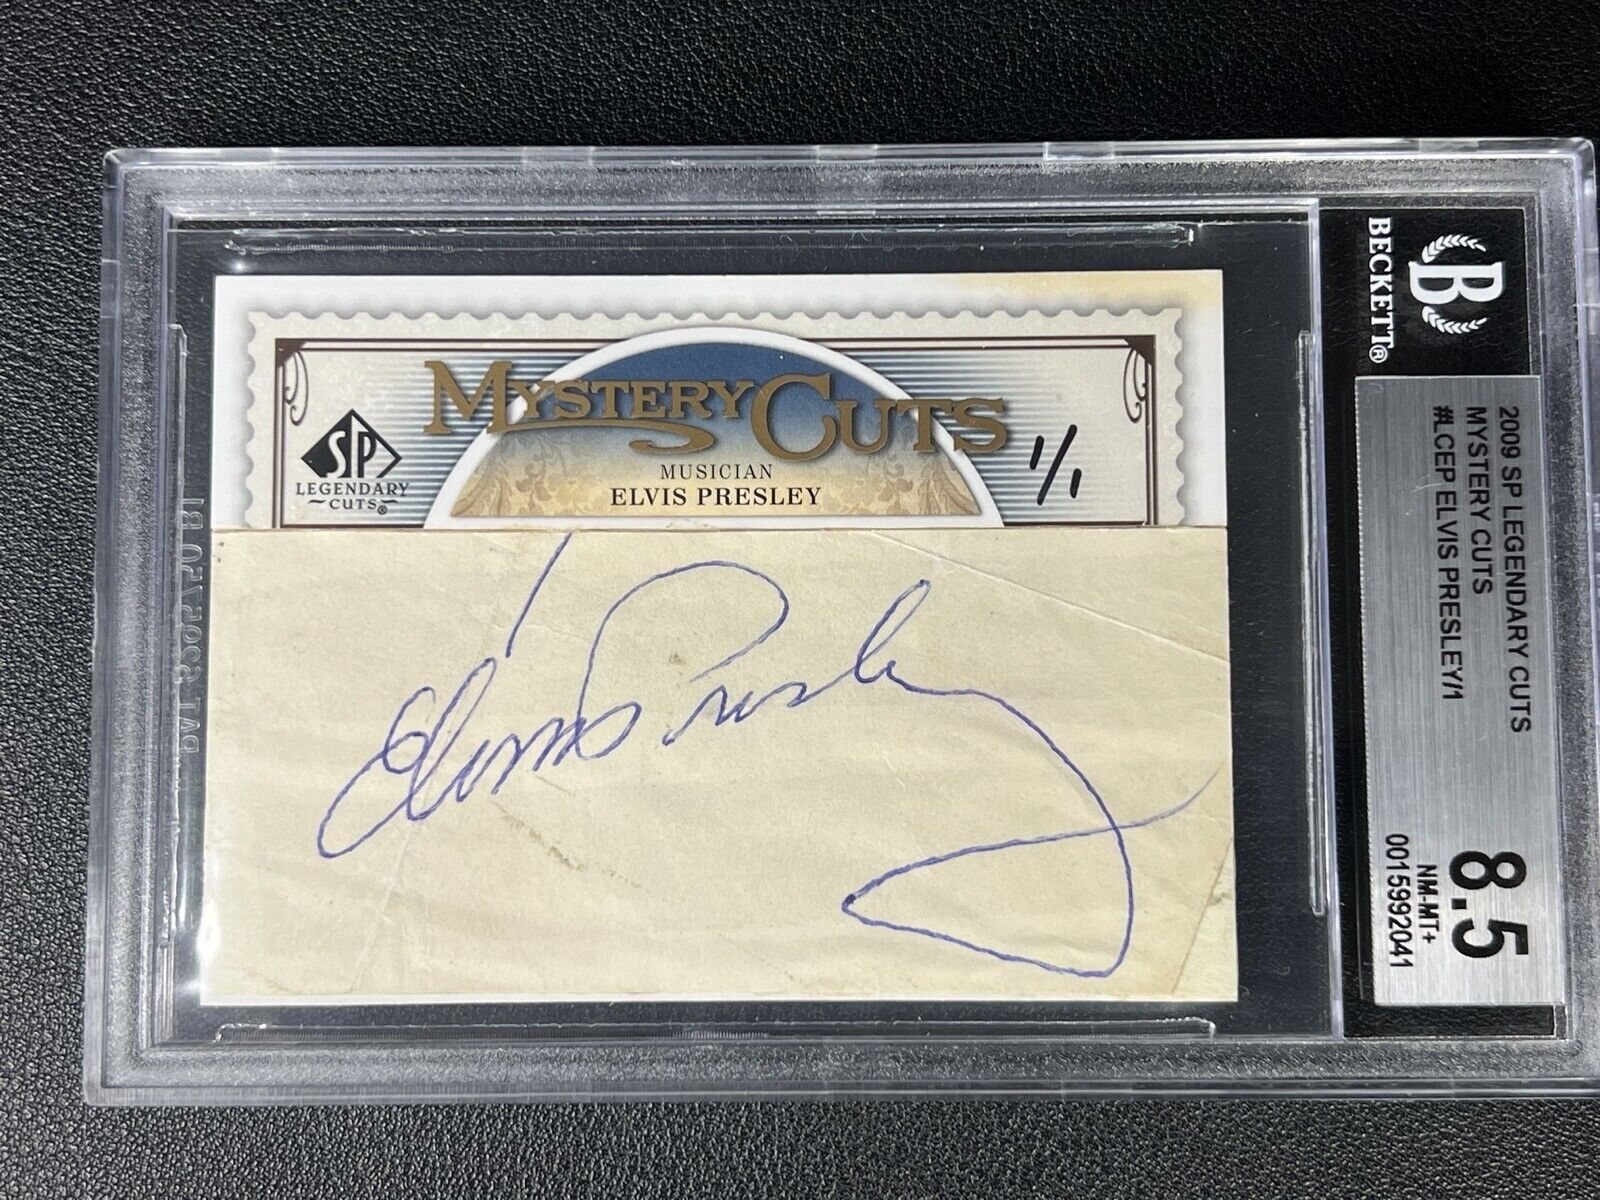 ELVIS PRESLEY BGS 2009 SP LEGENDARY CUTS MYSTERY CUT AUTOGRAPH AUTO SIGNED 1/1